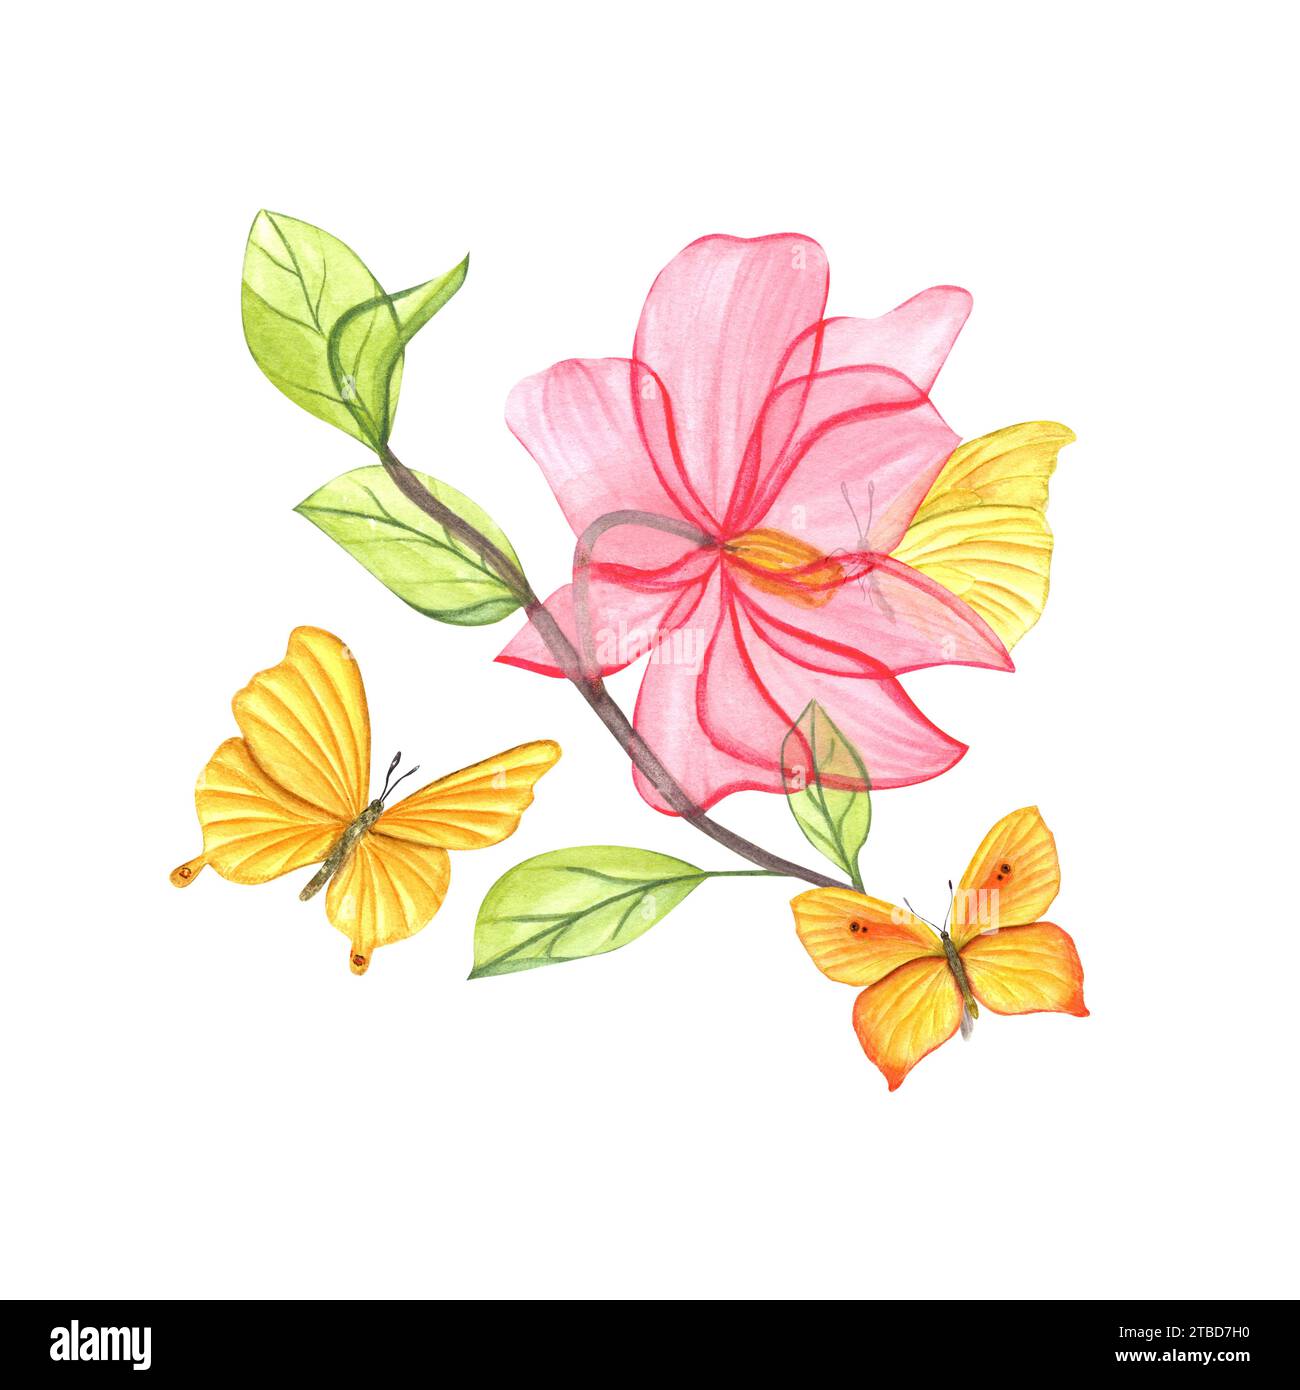 Magnolia branch with pink flower. Transparent spring flowering plant. Yellow butterflies fluttering around plant. Flower petals, green young leaves. Stock Photo